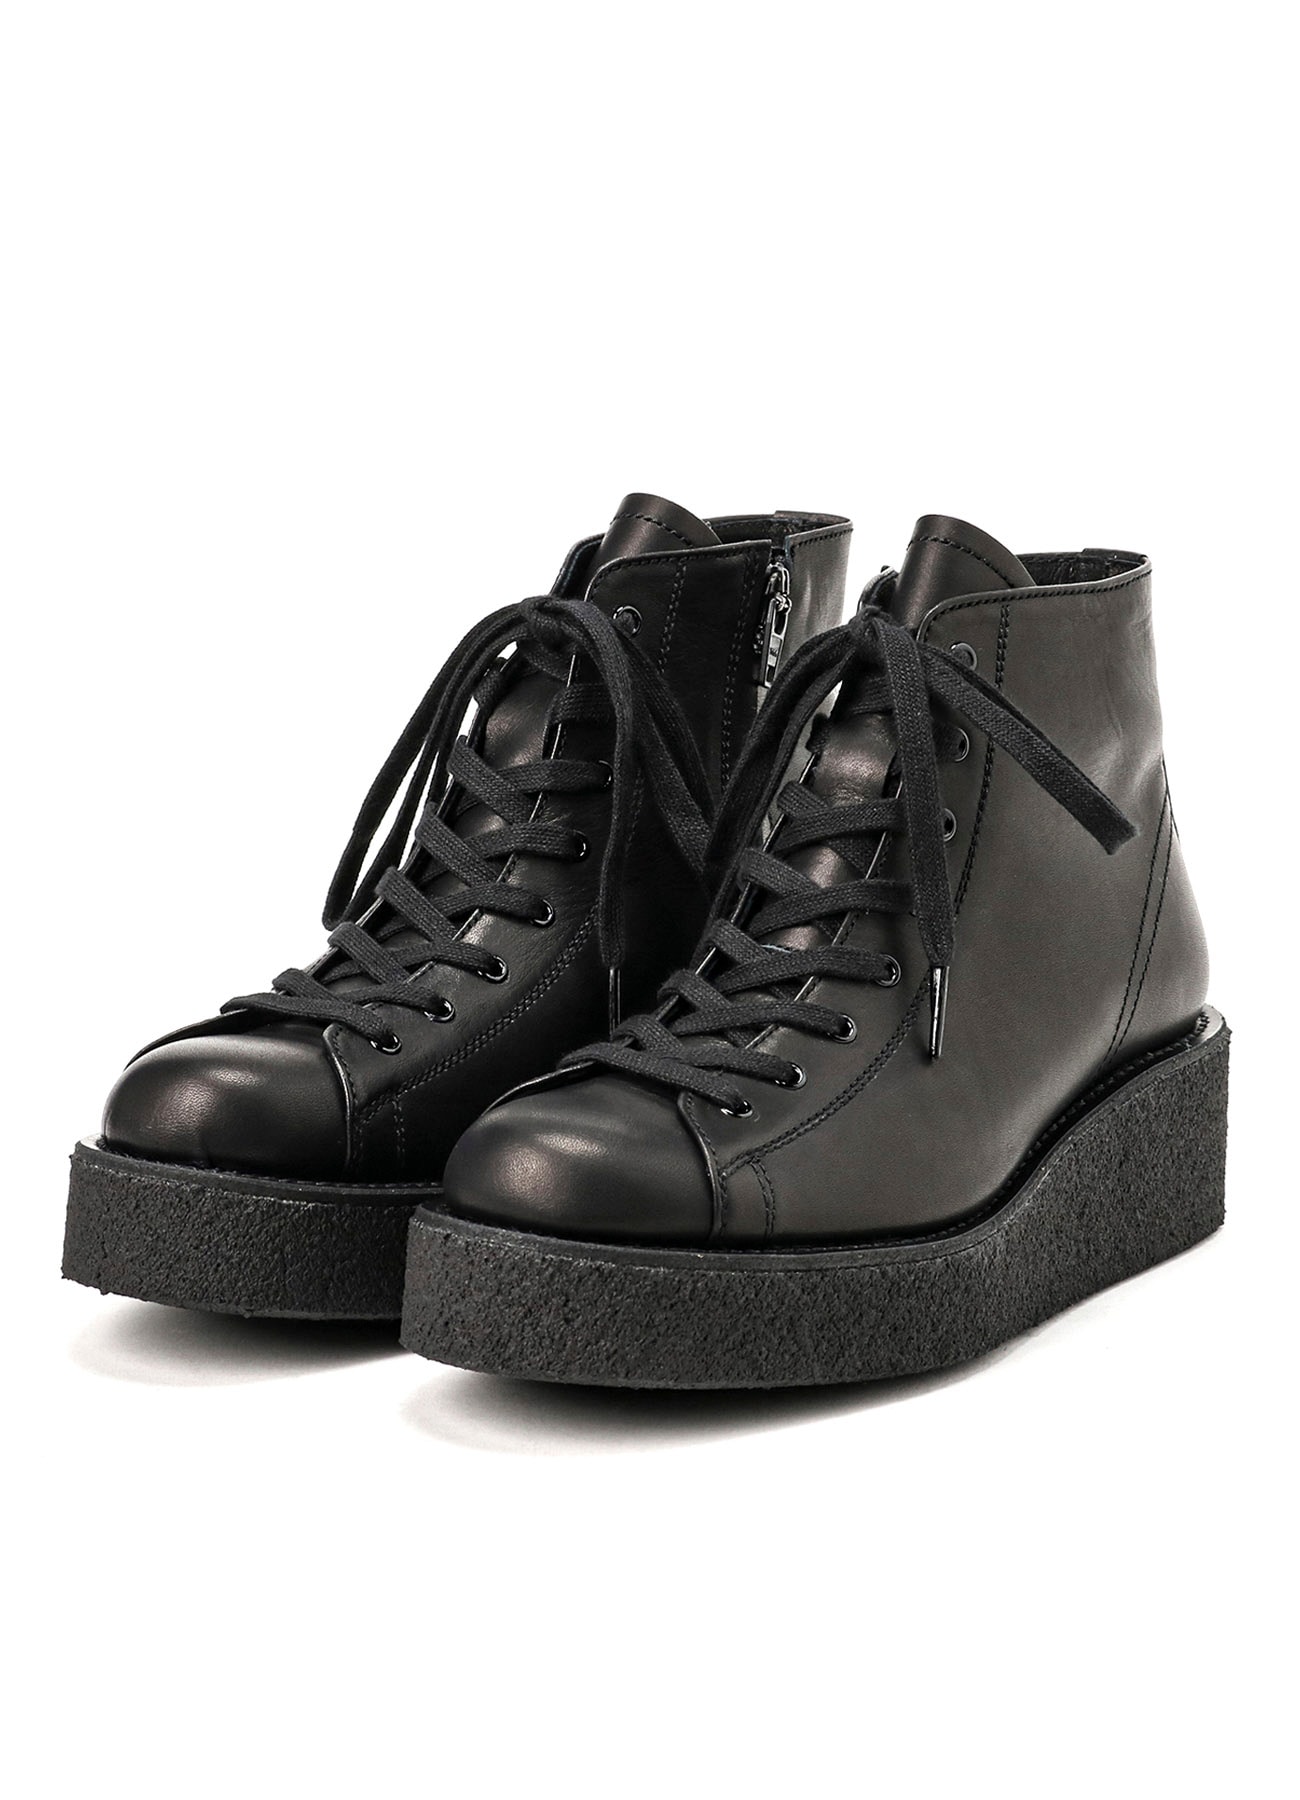 【6/7 10:00 Release】SOFT SMOOTH LEATHER LACE UP ANKLE BOOTS